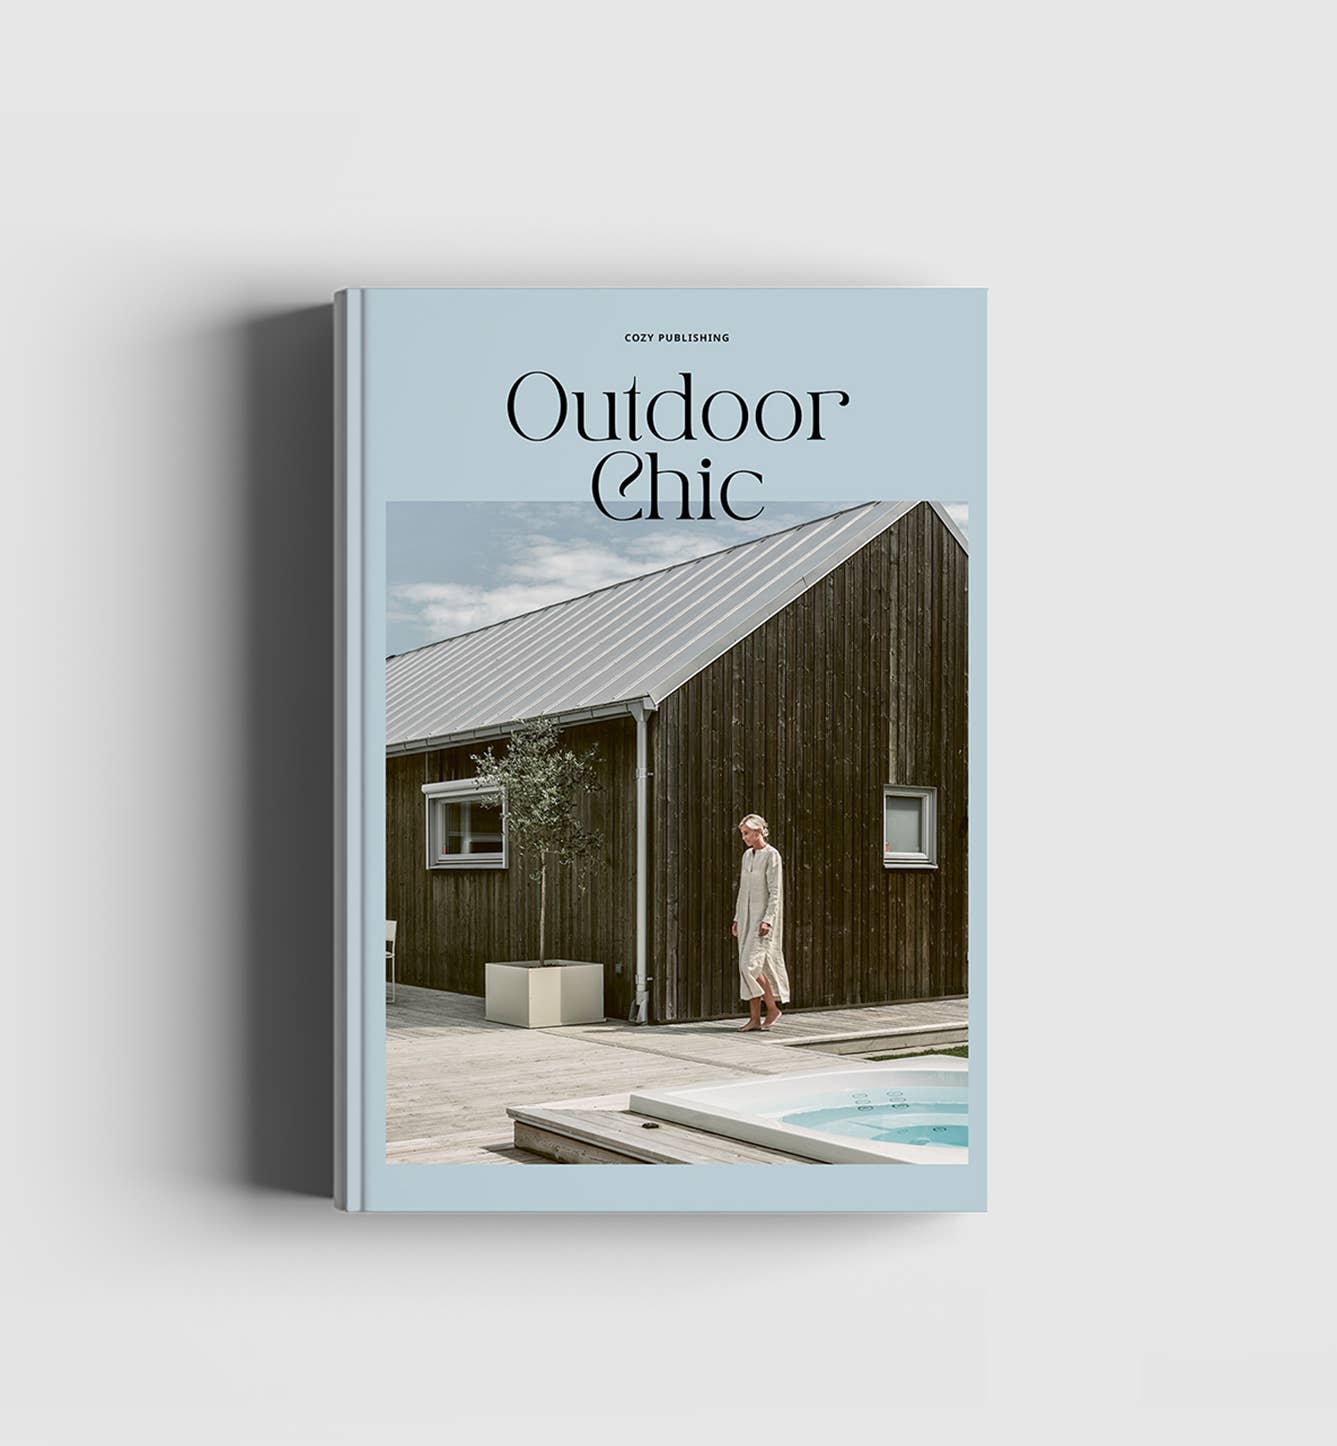 Outdoor Chic by Cozy Publishing